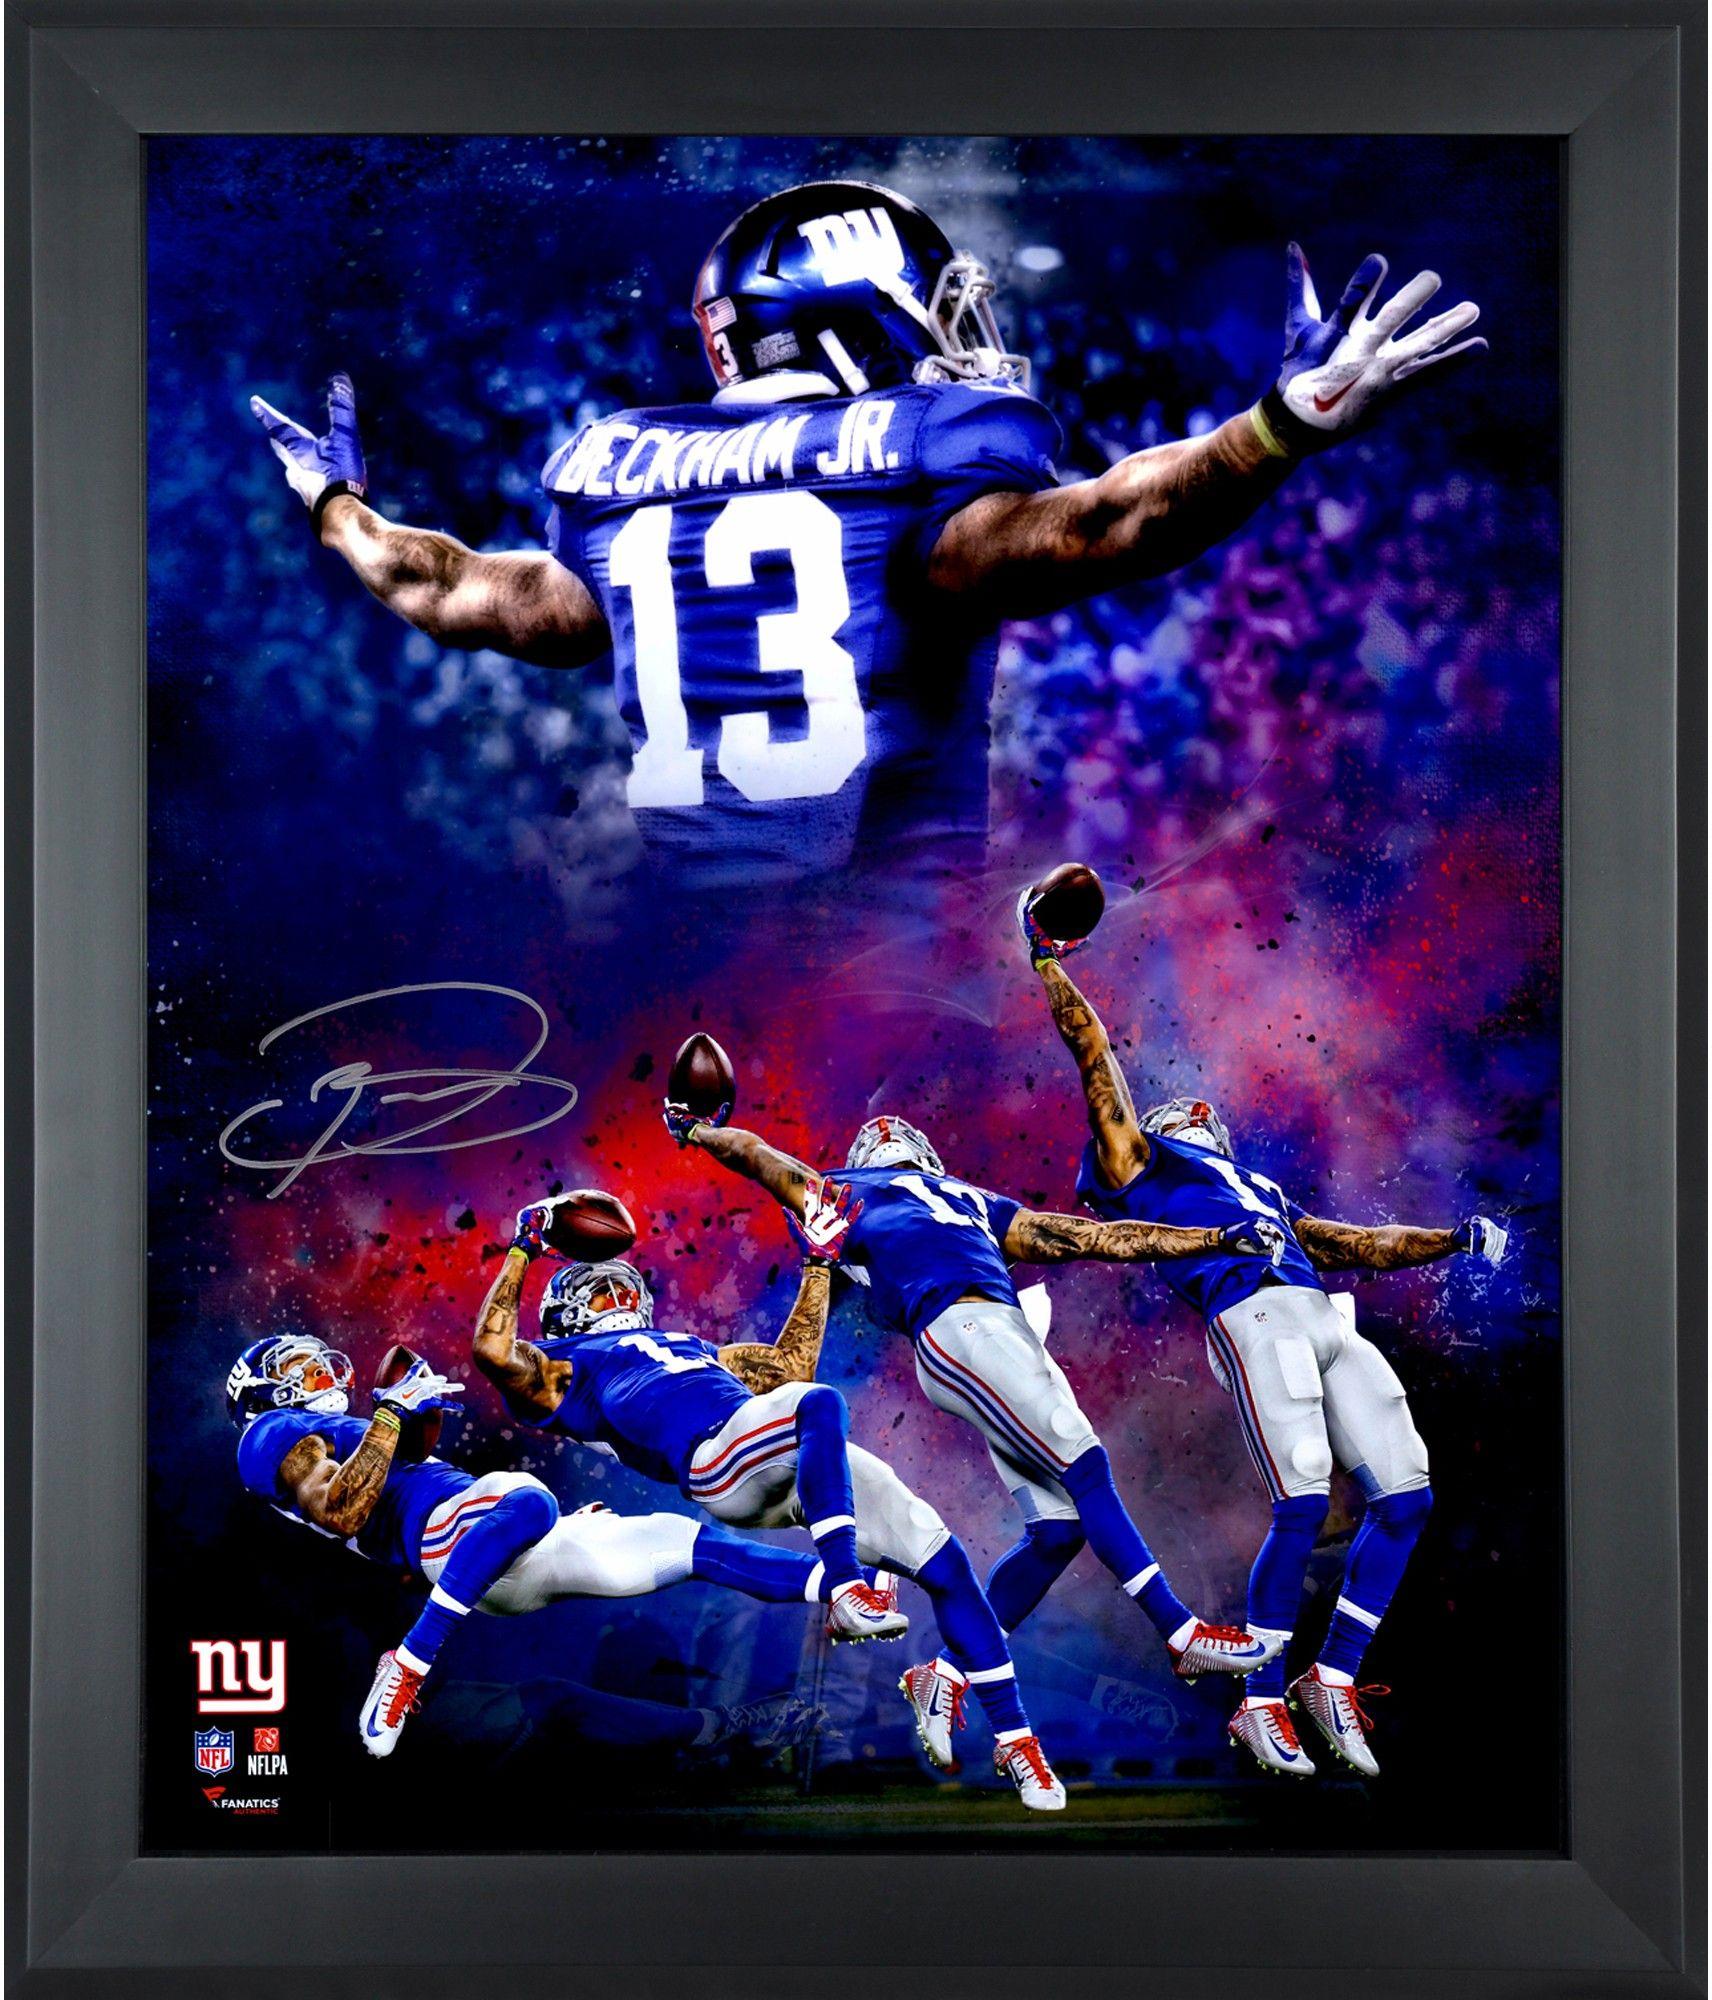 About Odell Beckham Jr Wallpapers HD Google Play version   Apptopia